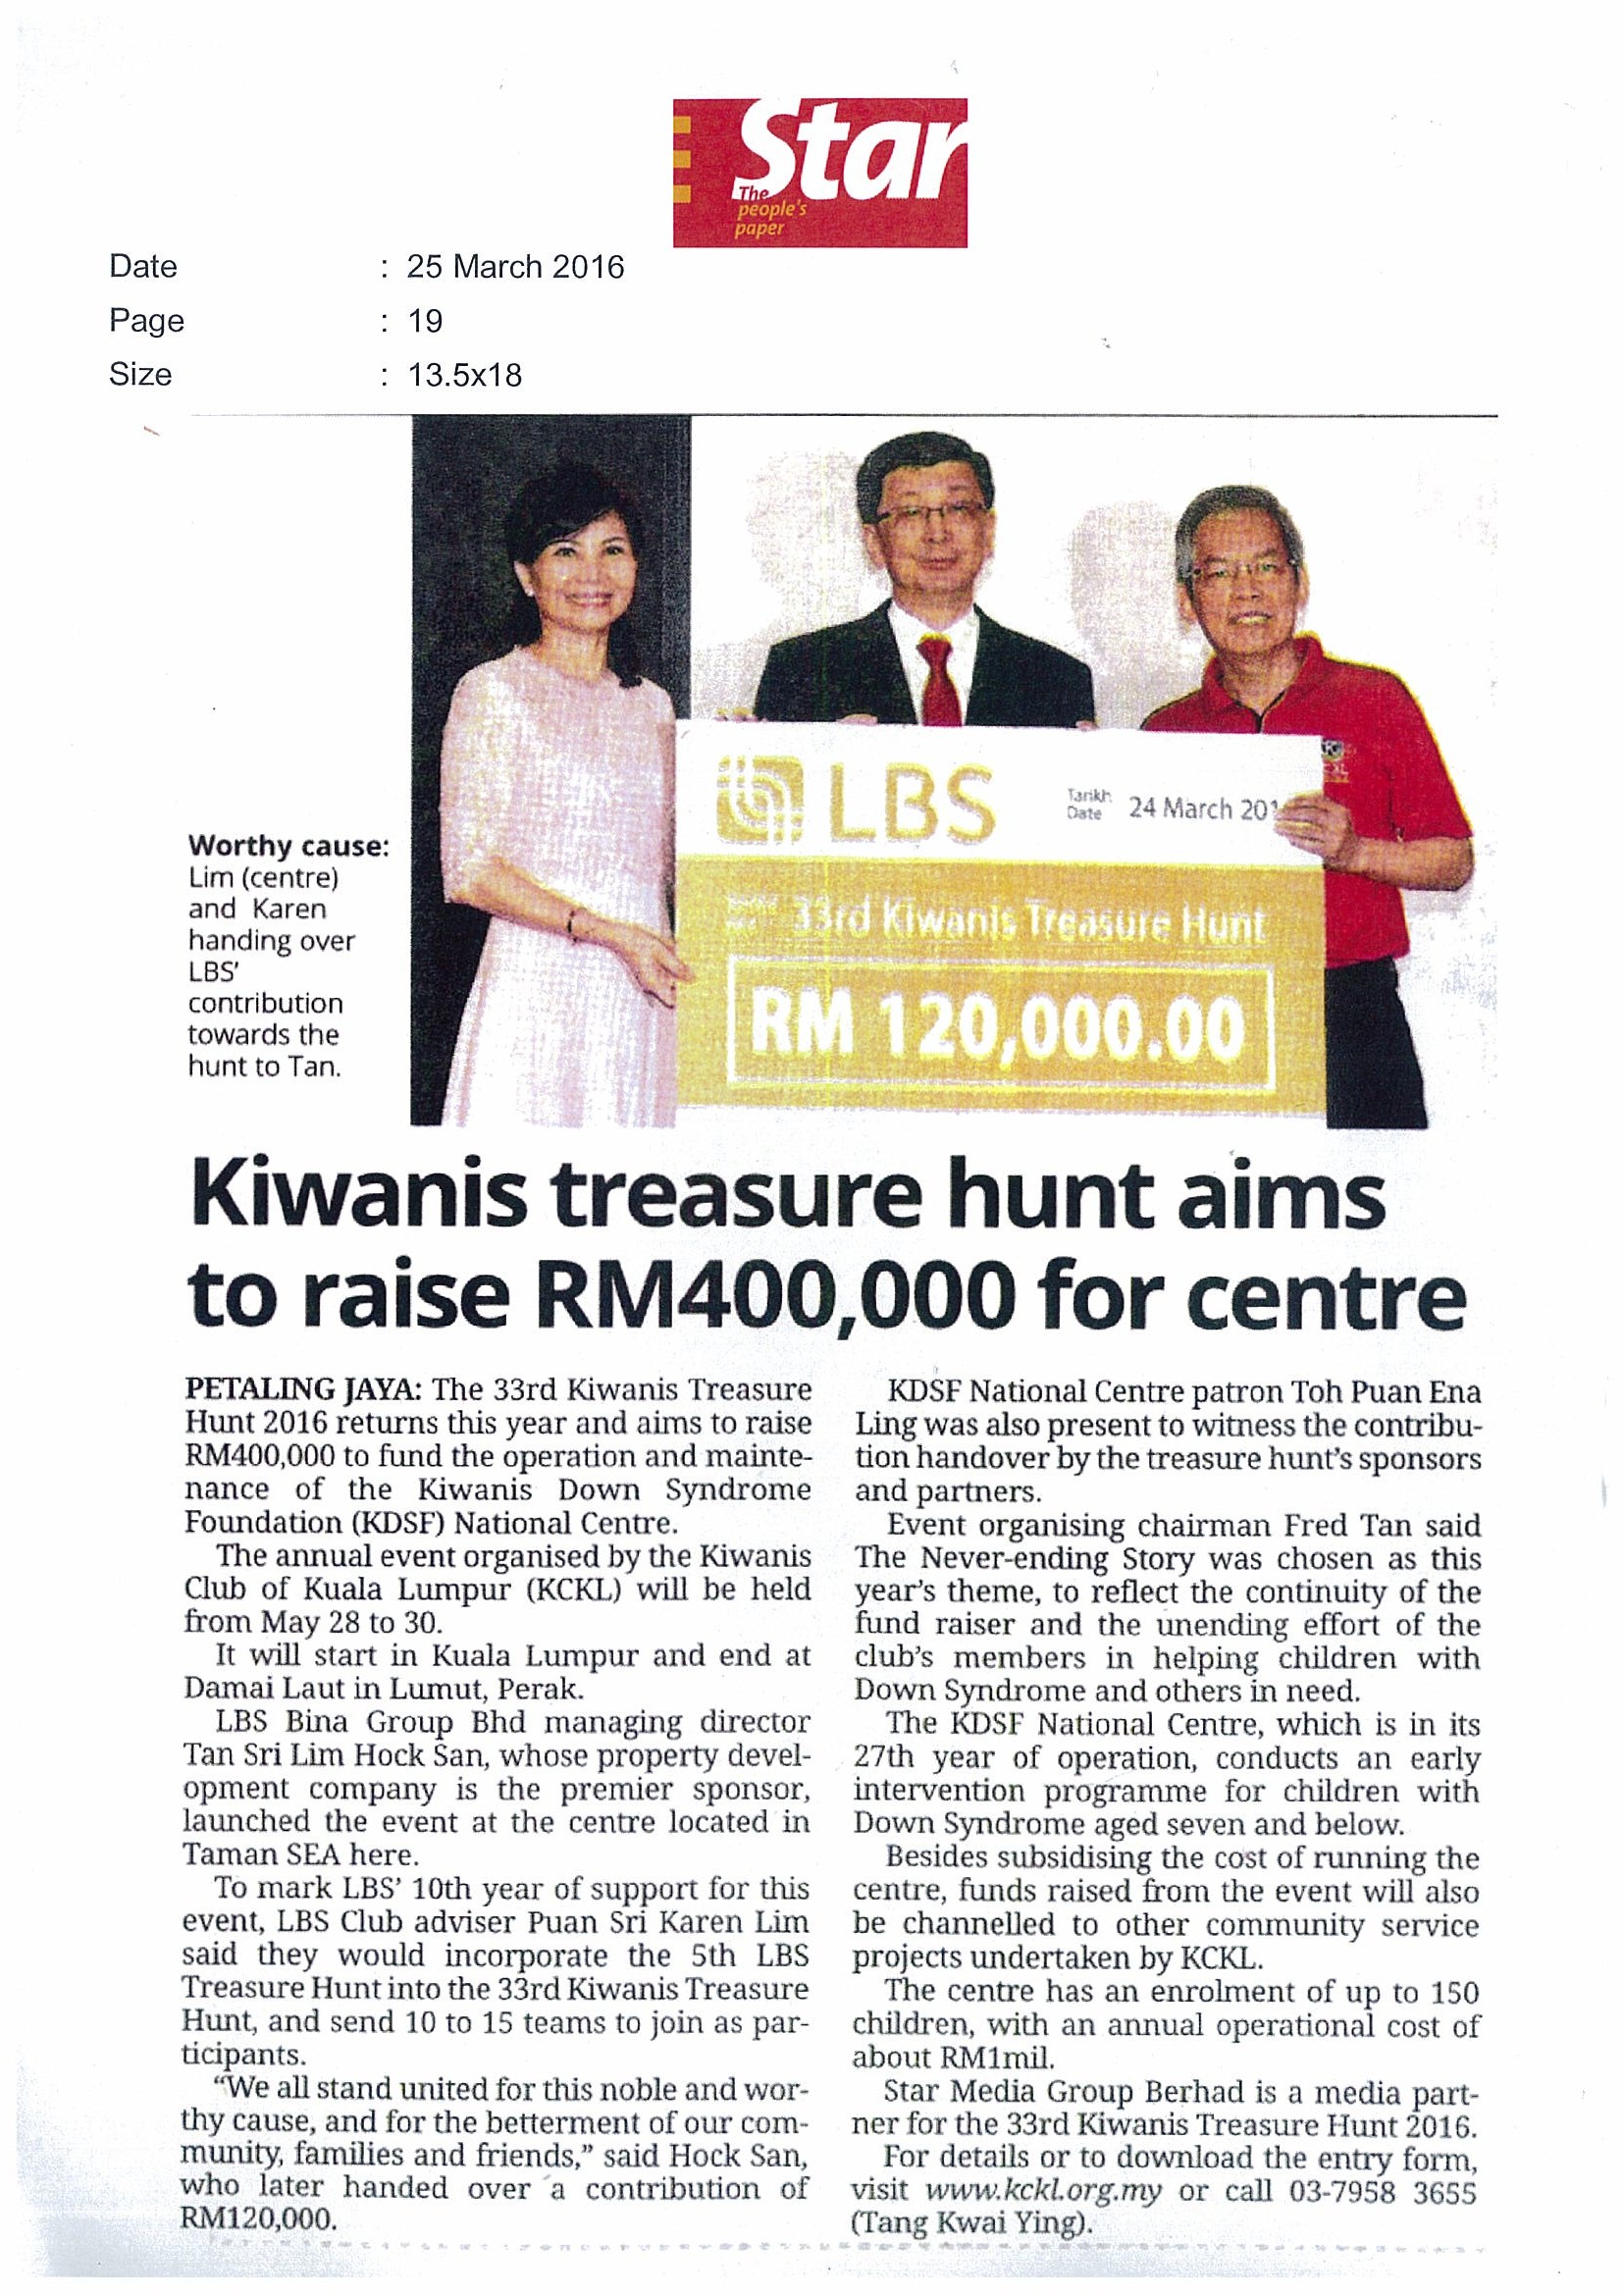 2016.03.25 The Star – Kiwanis treasure hunt aims to raise RM400,000 for centre